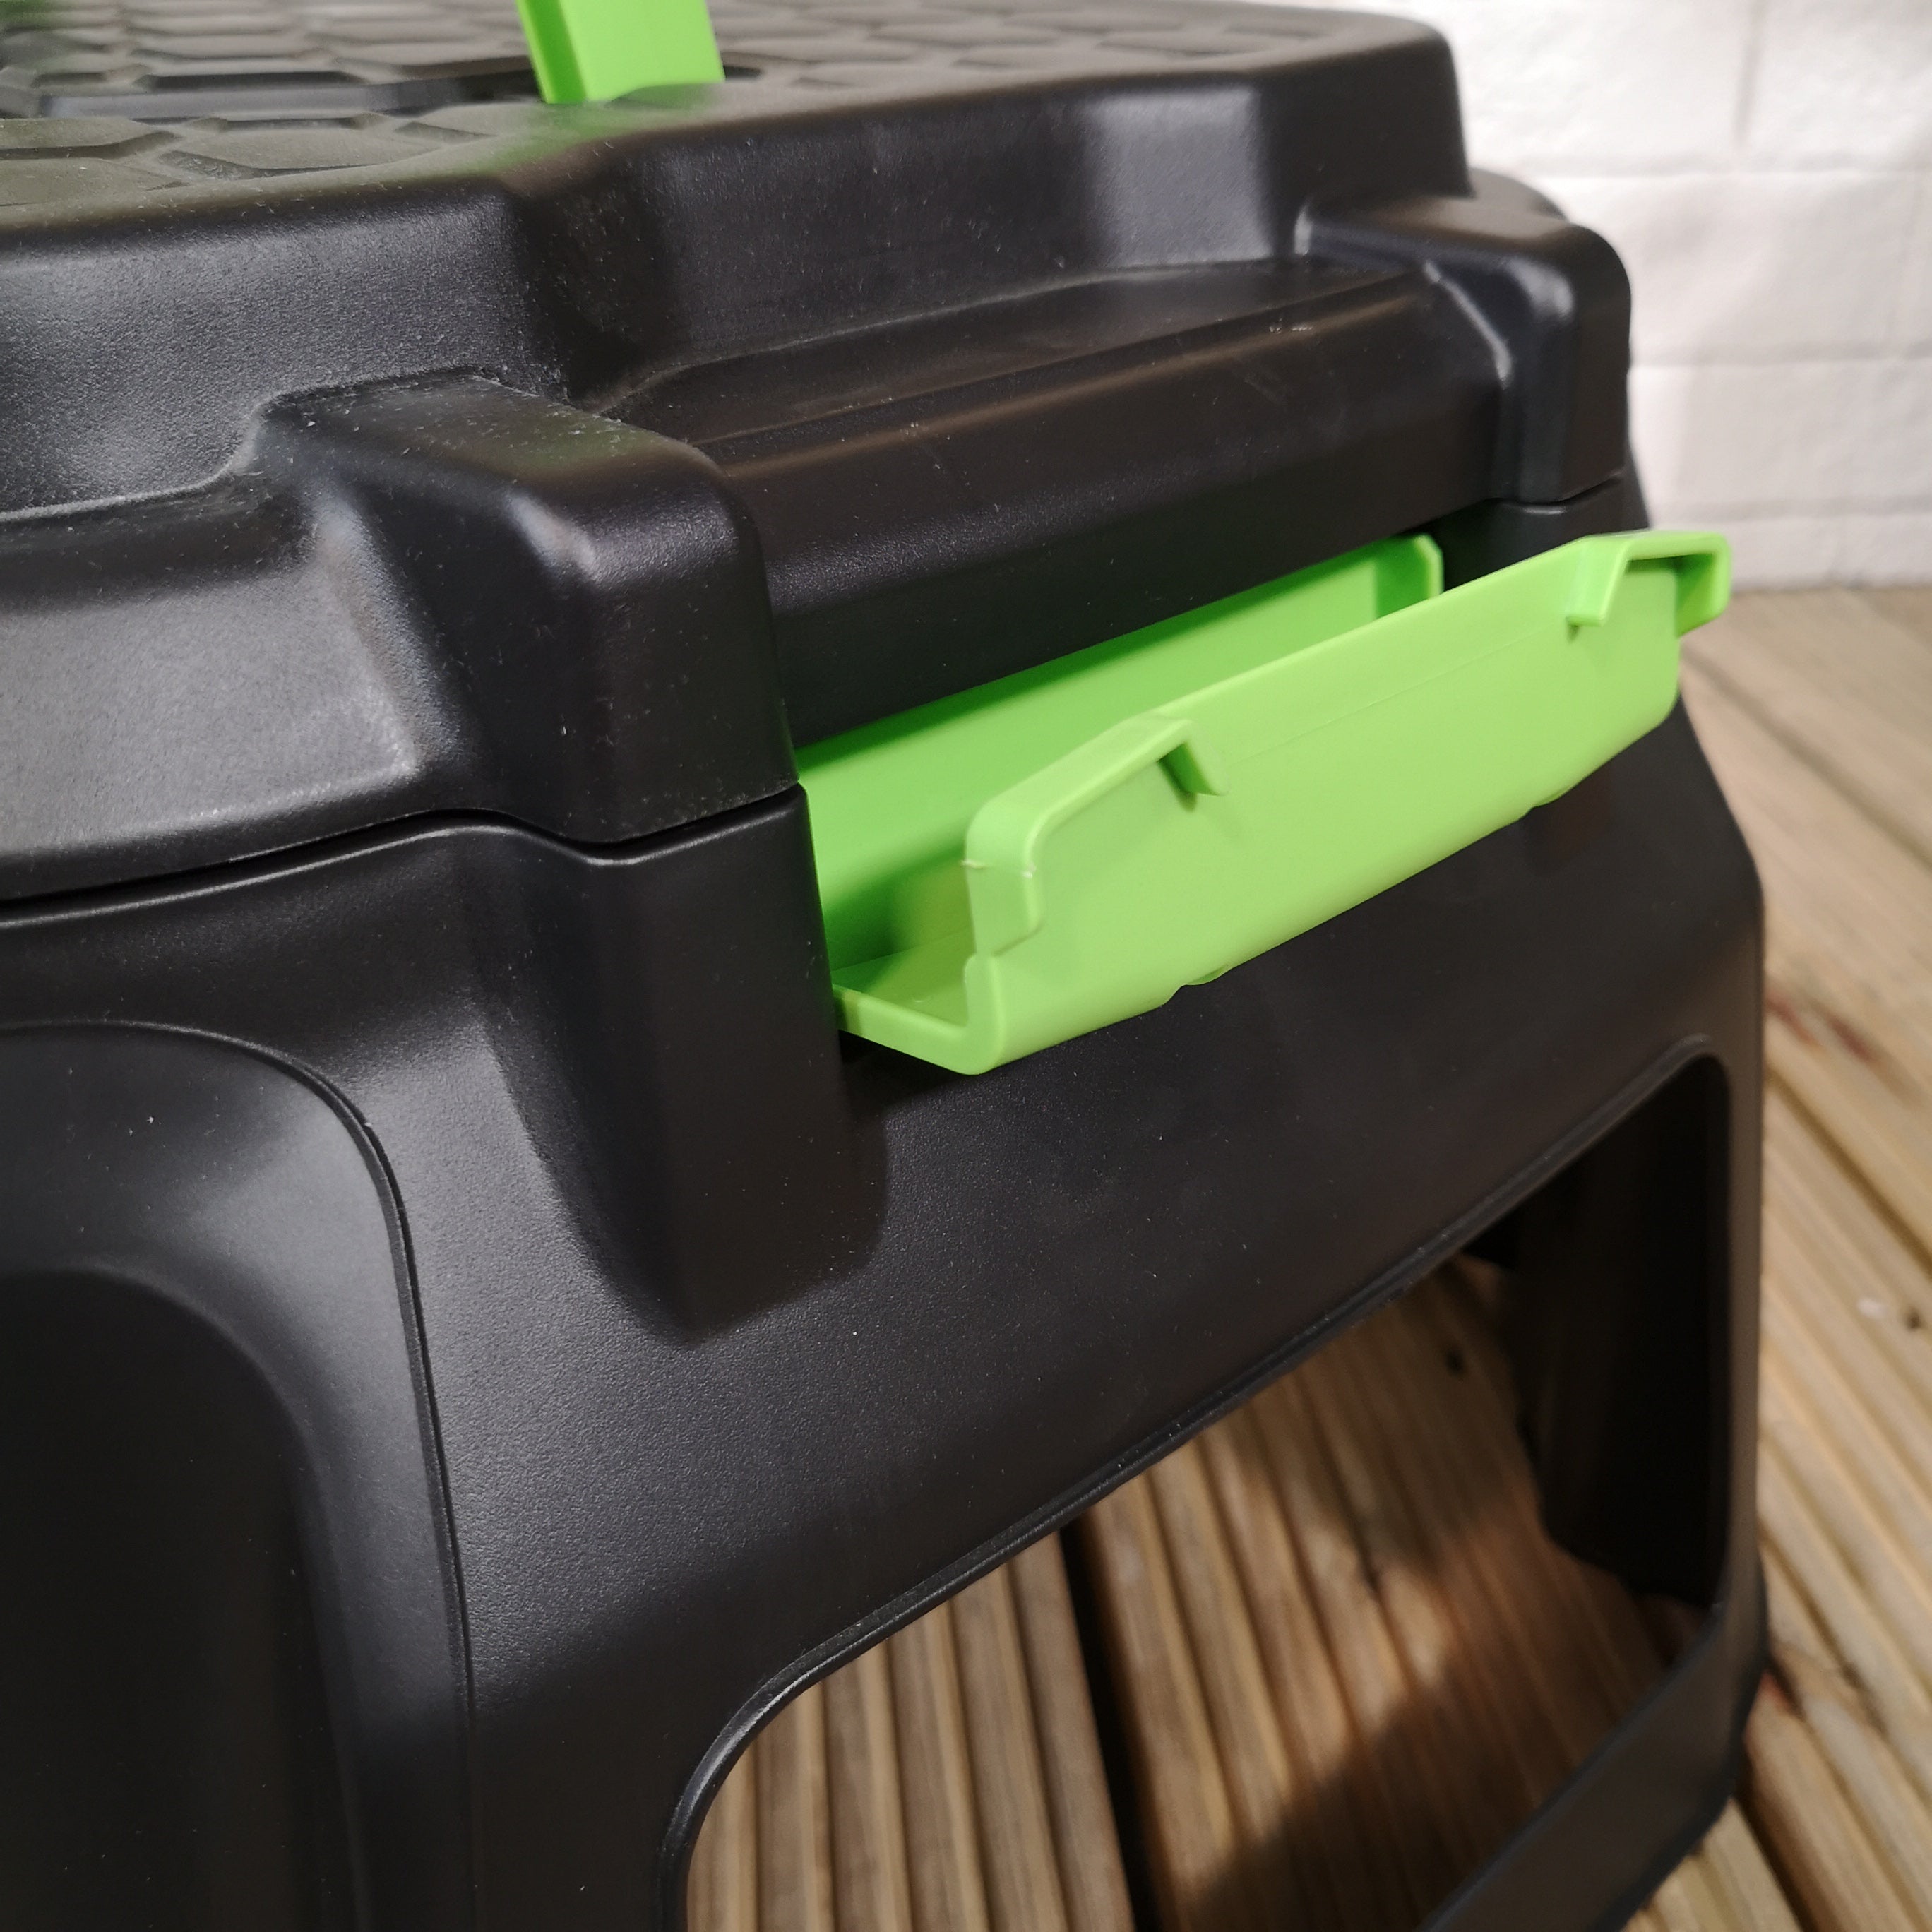 2 x 33cm Black and Green Heavy Duty Step Stool with Tool Caddy Storage